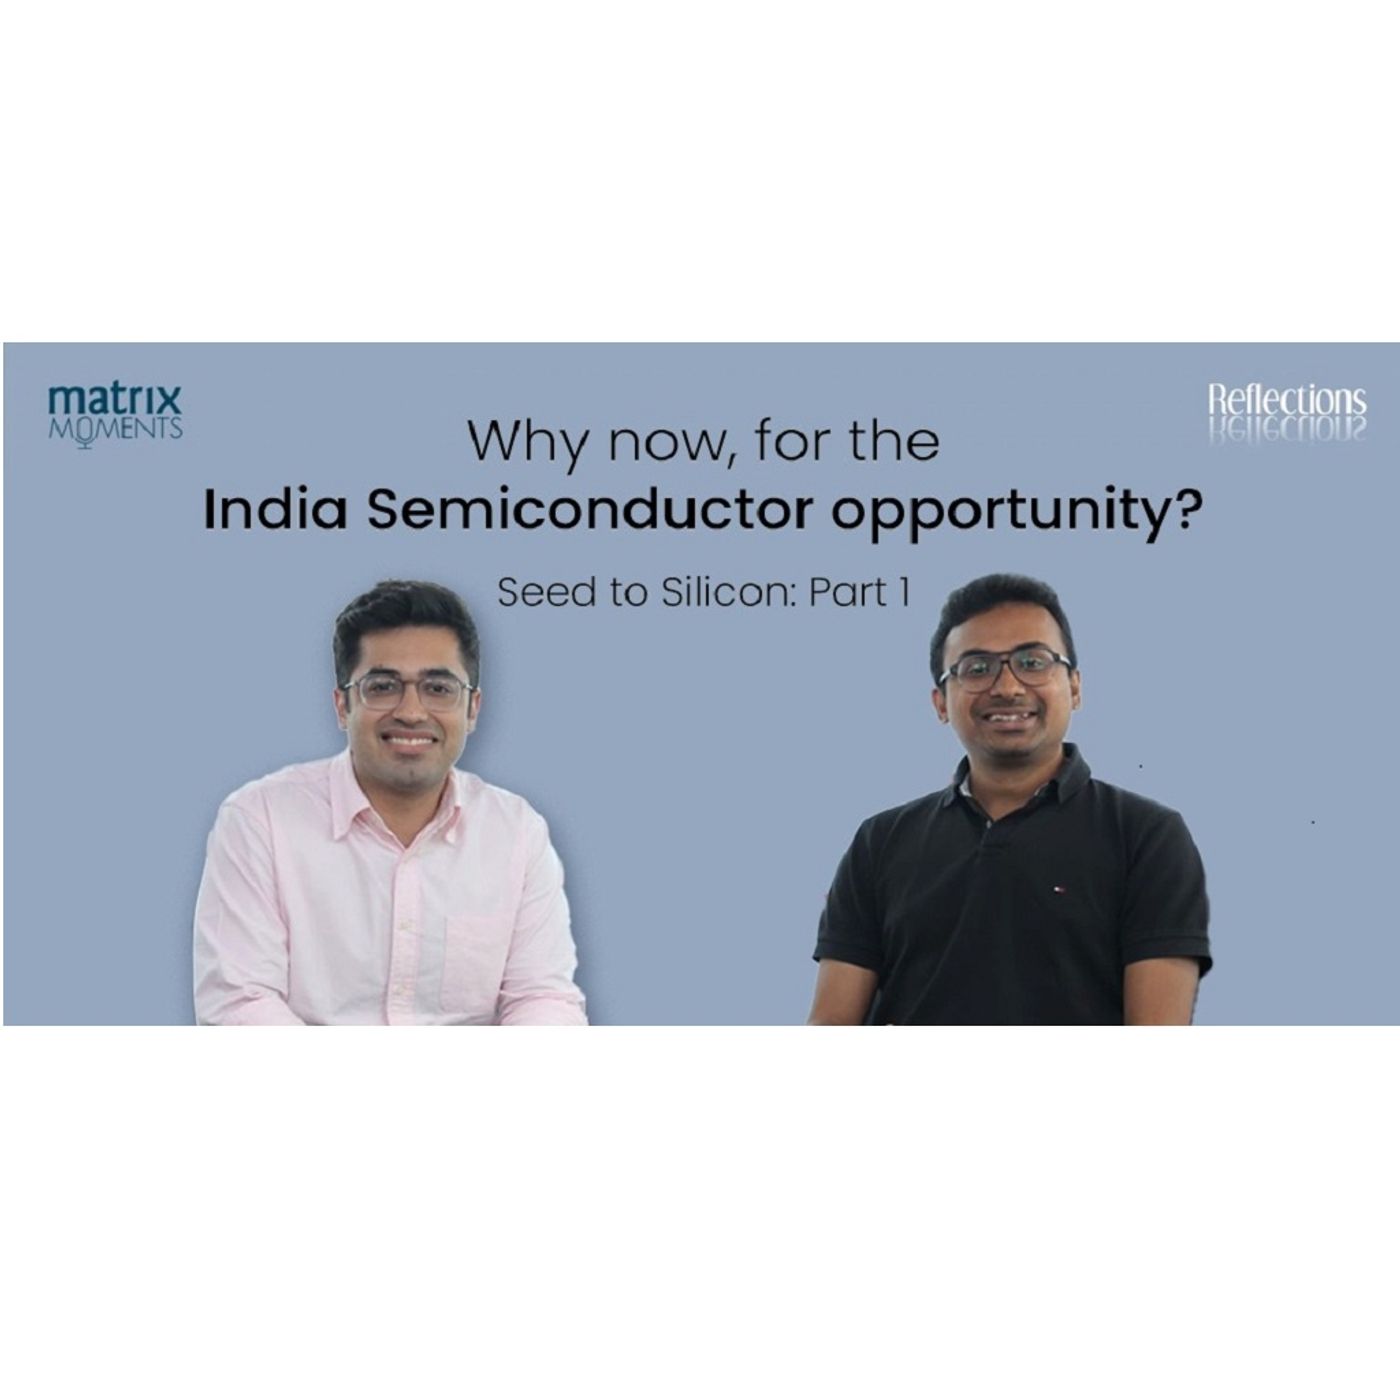 171: Why now, for the India Semiconductor opportunity? Seed to Silicon part 1